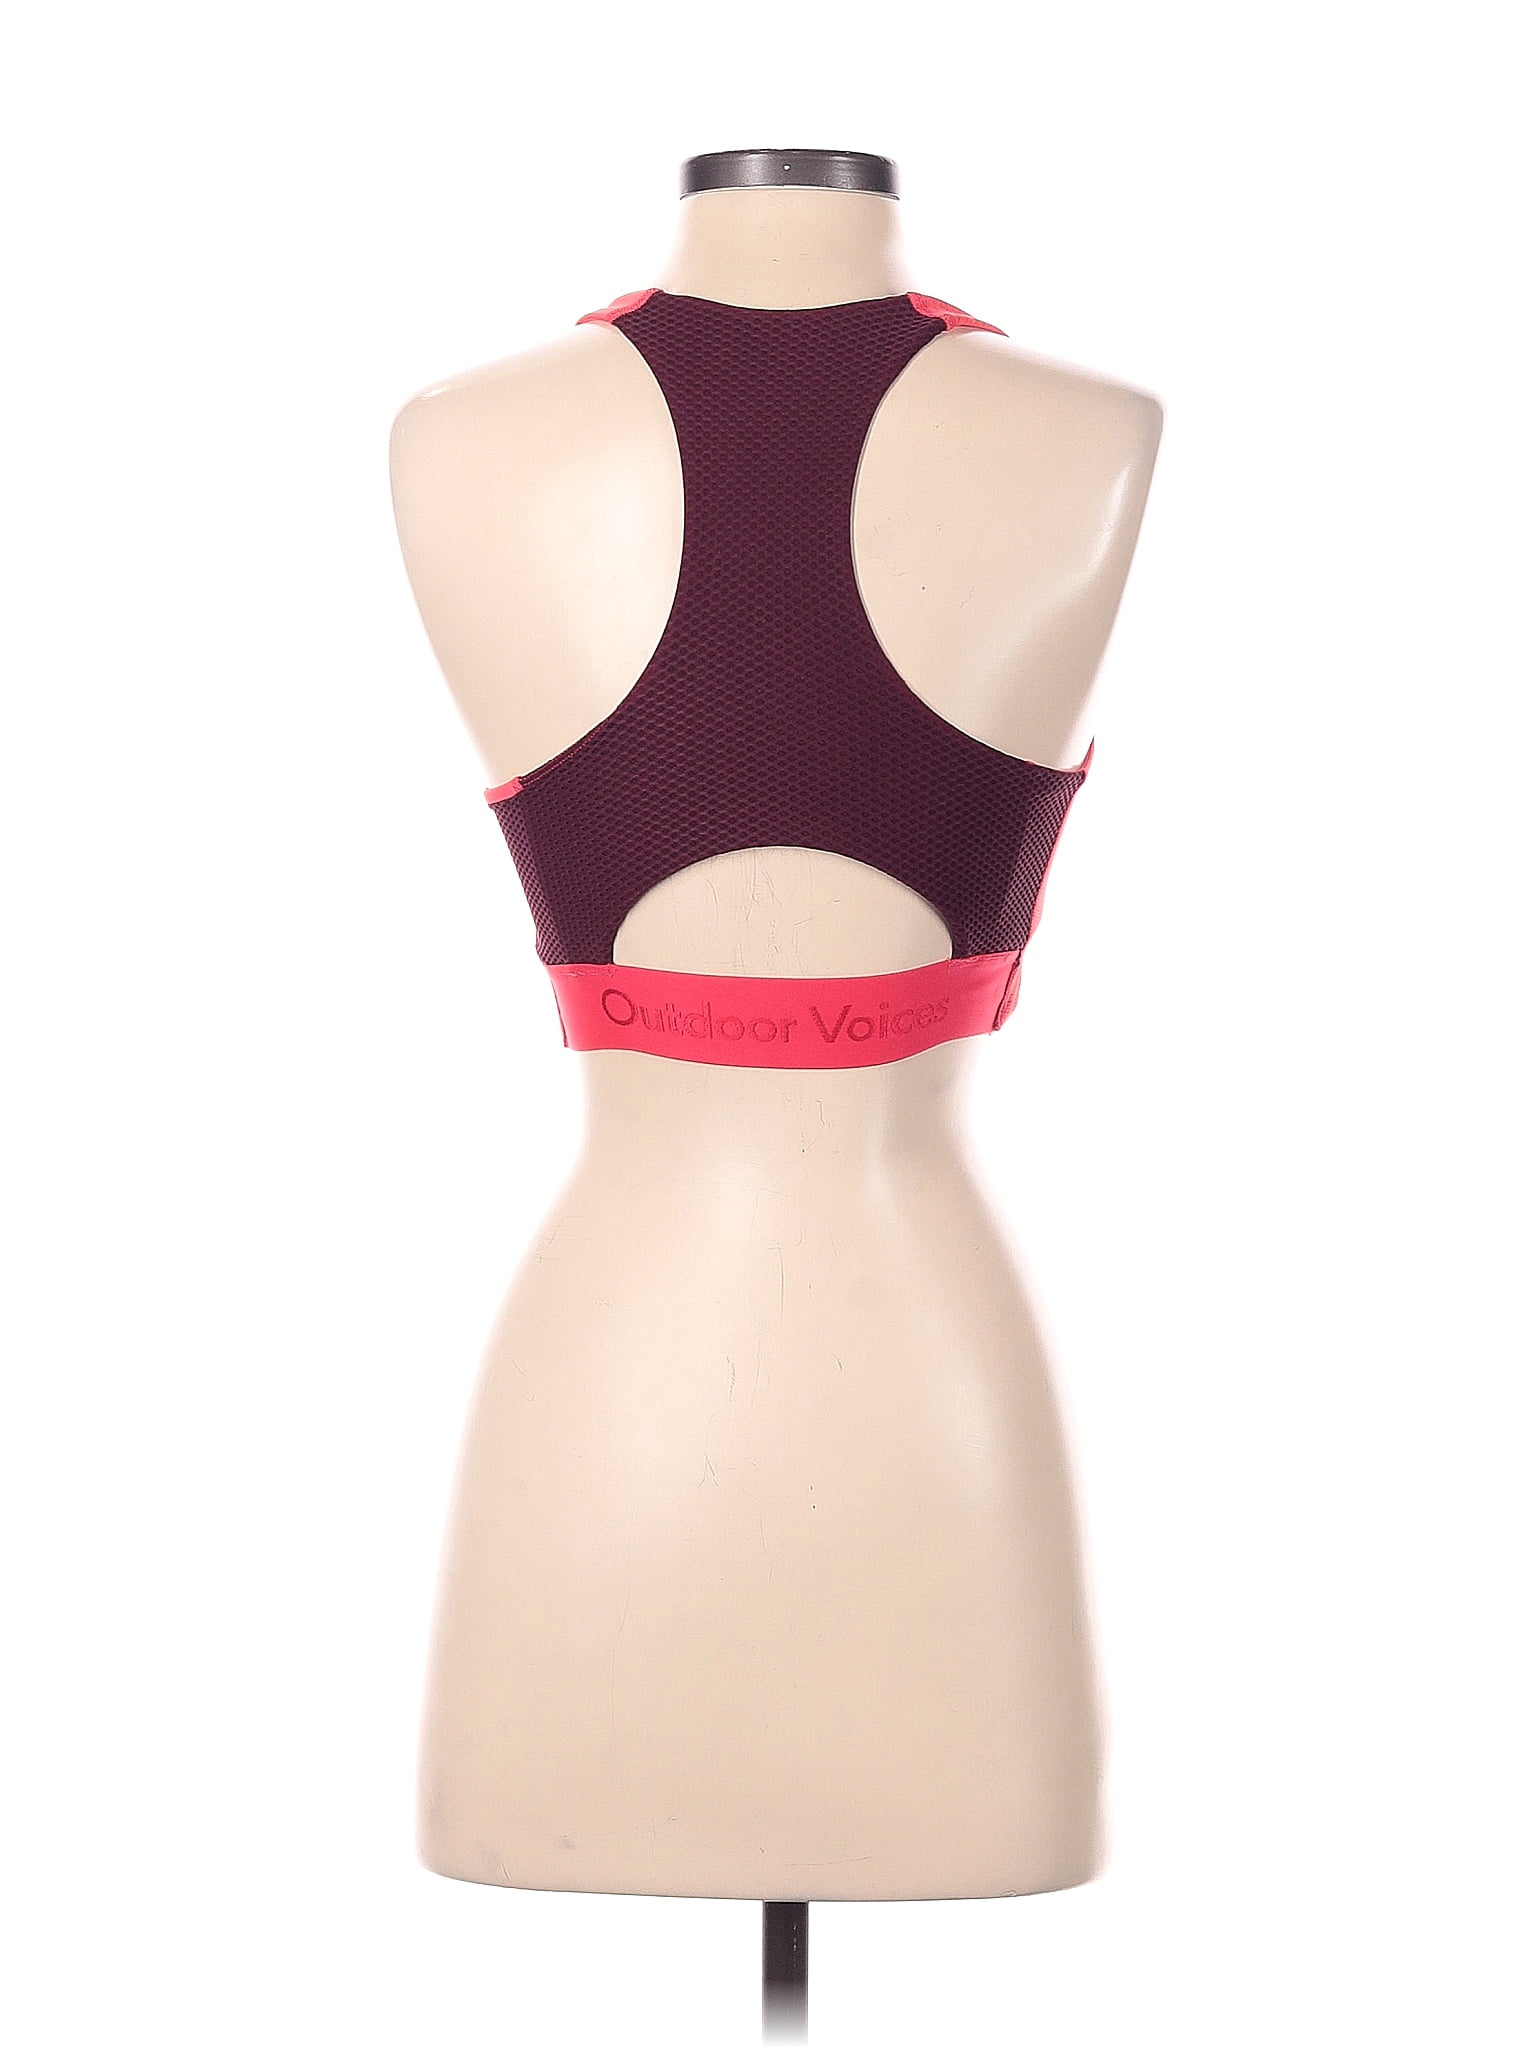 Outdoor Voices Light Pink Sports Bra XS X-Small - $23 - From Bethany